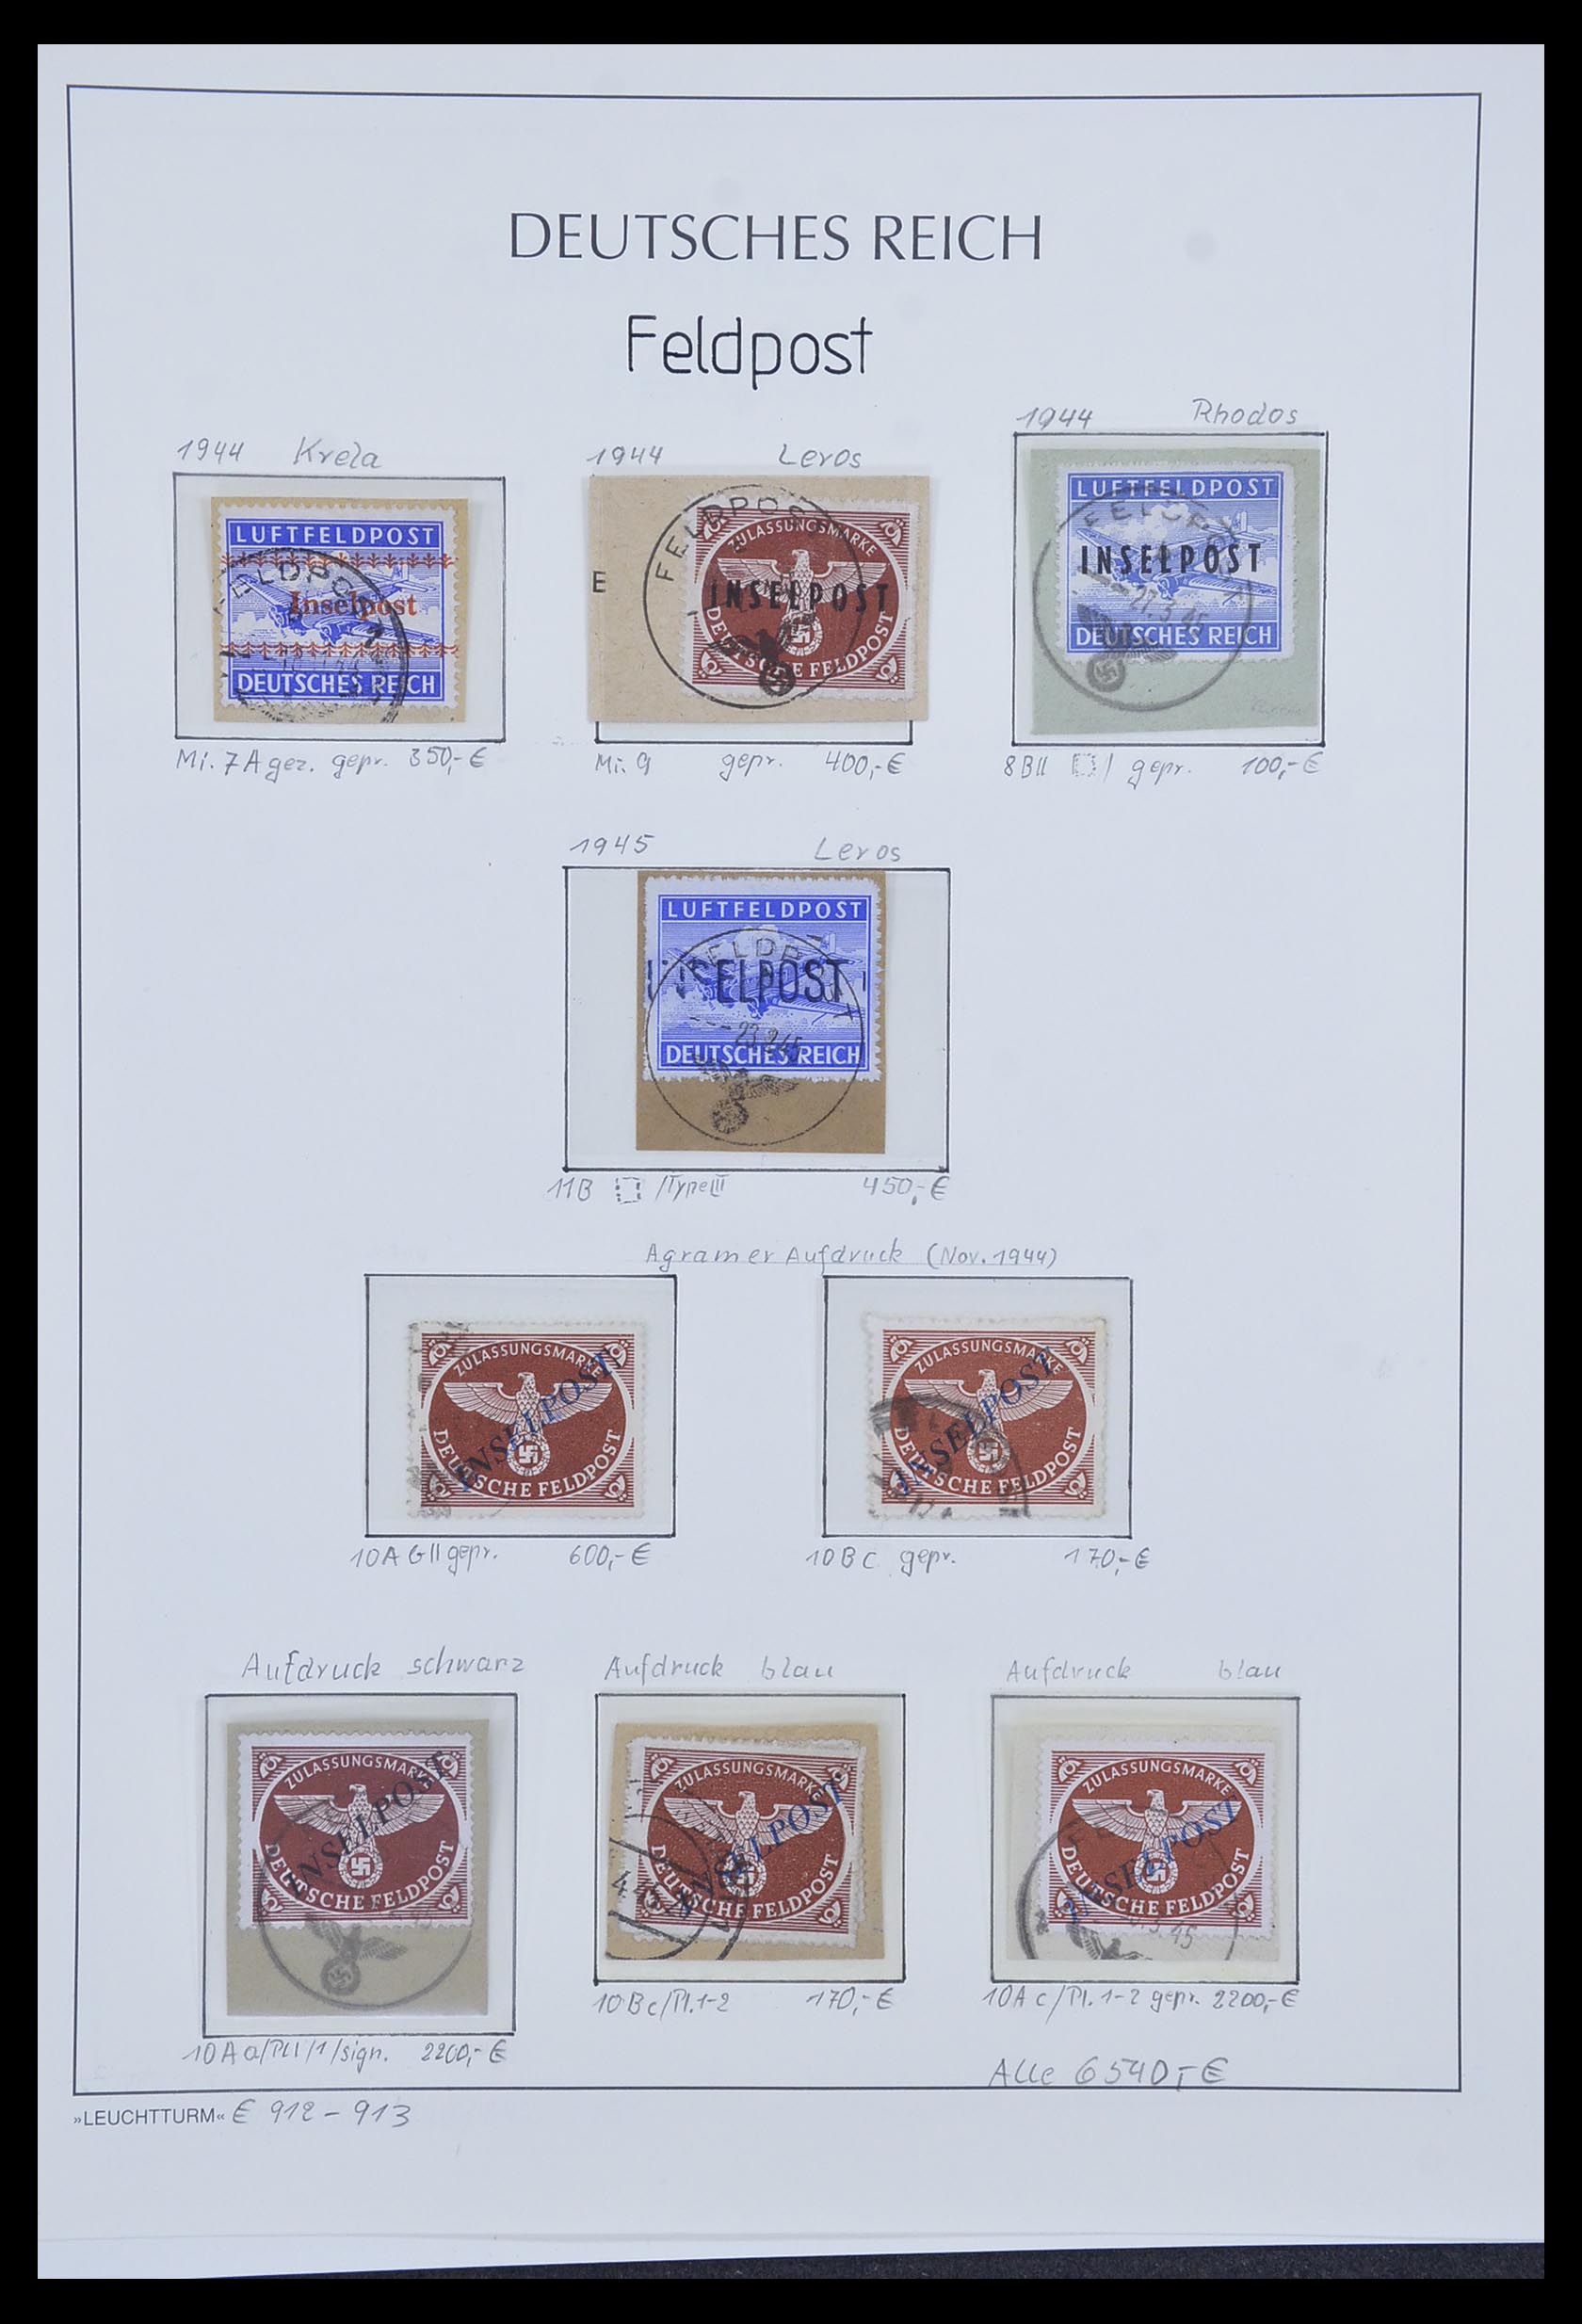 33965 001 - Stamp collection 33965 Germany fieldpost 1942-1945.